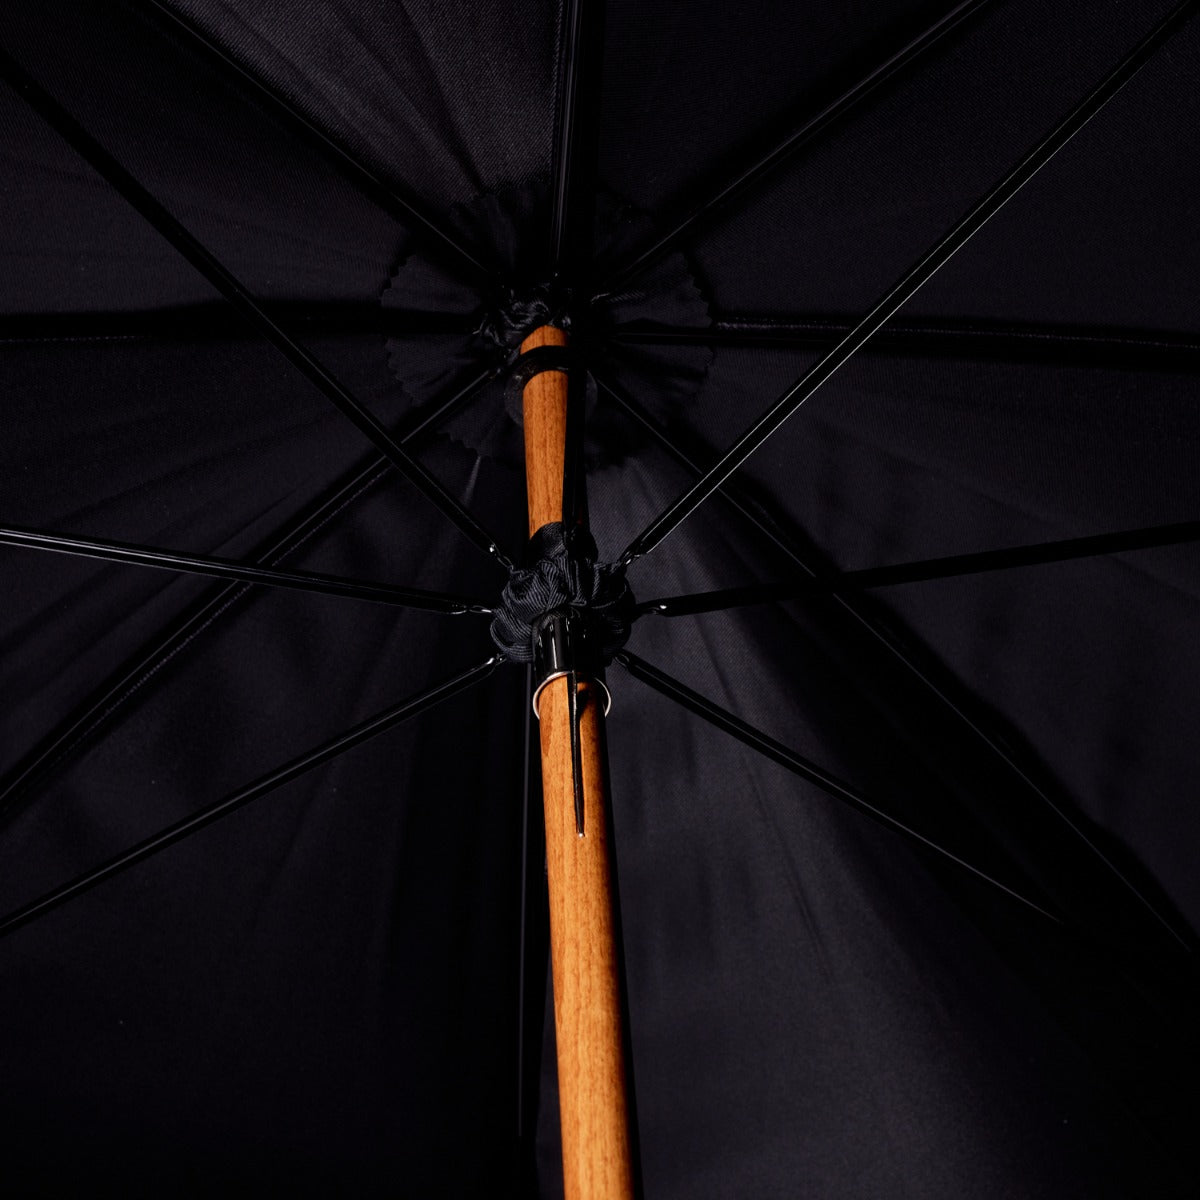 A Chestnut Solid Stick Umbrella with Black Canopy by KirbyAllison.com, with a wooden handle and knob-end.